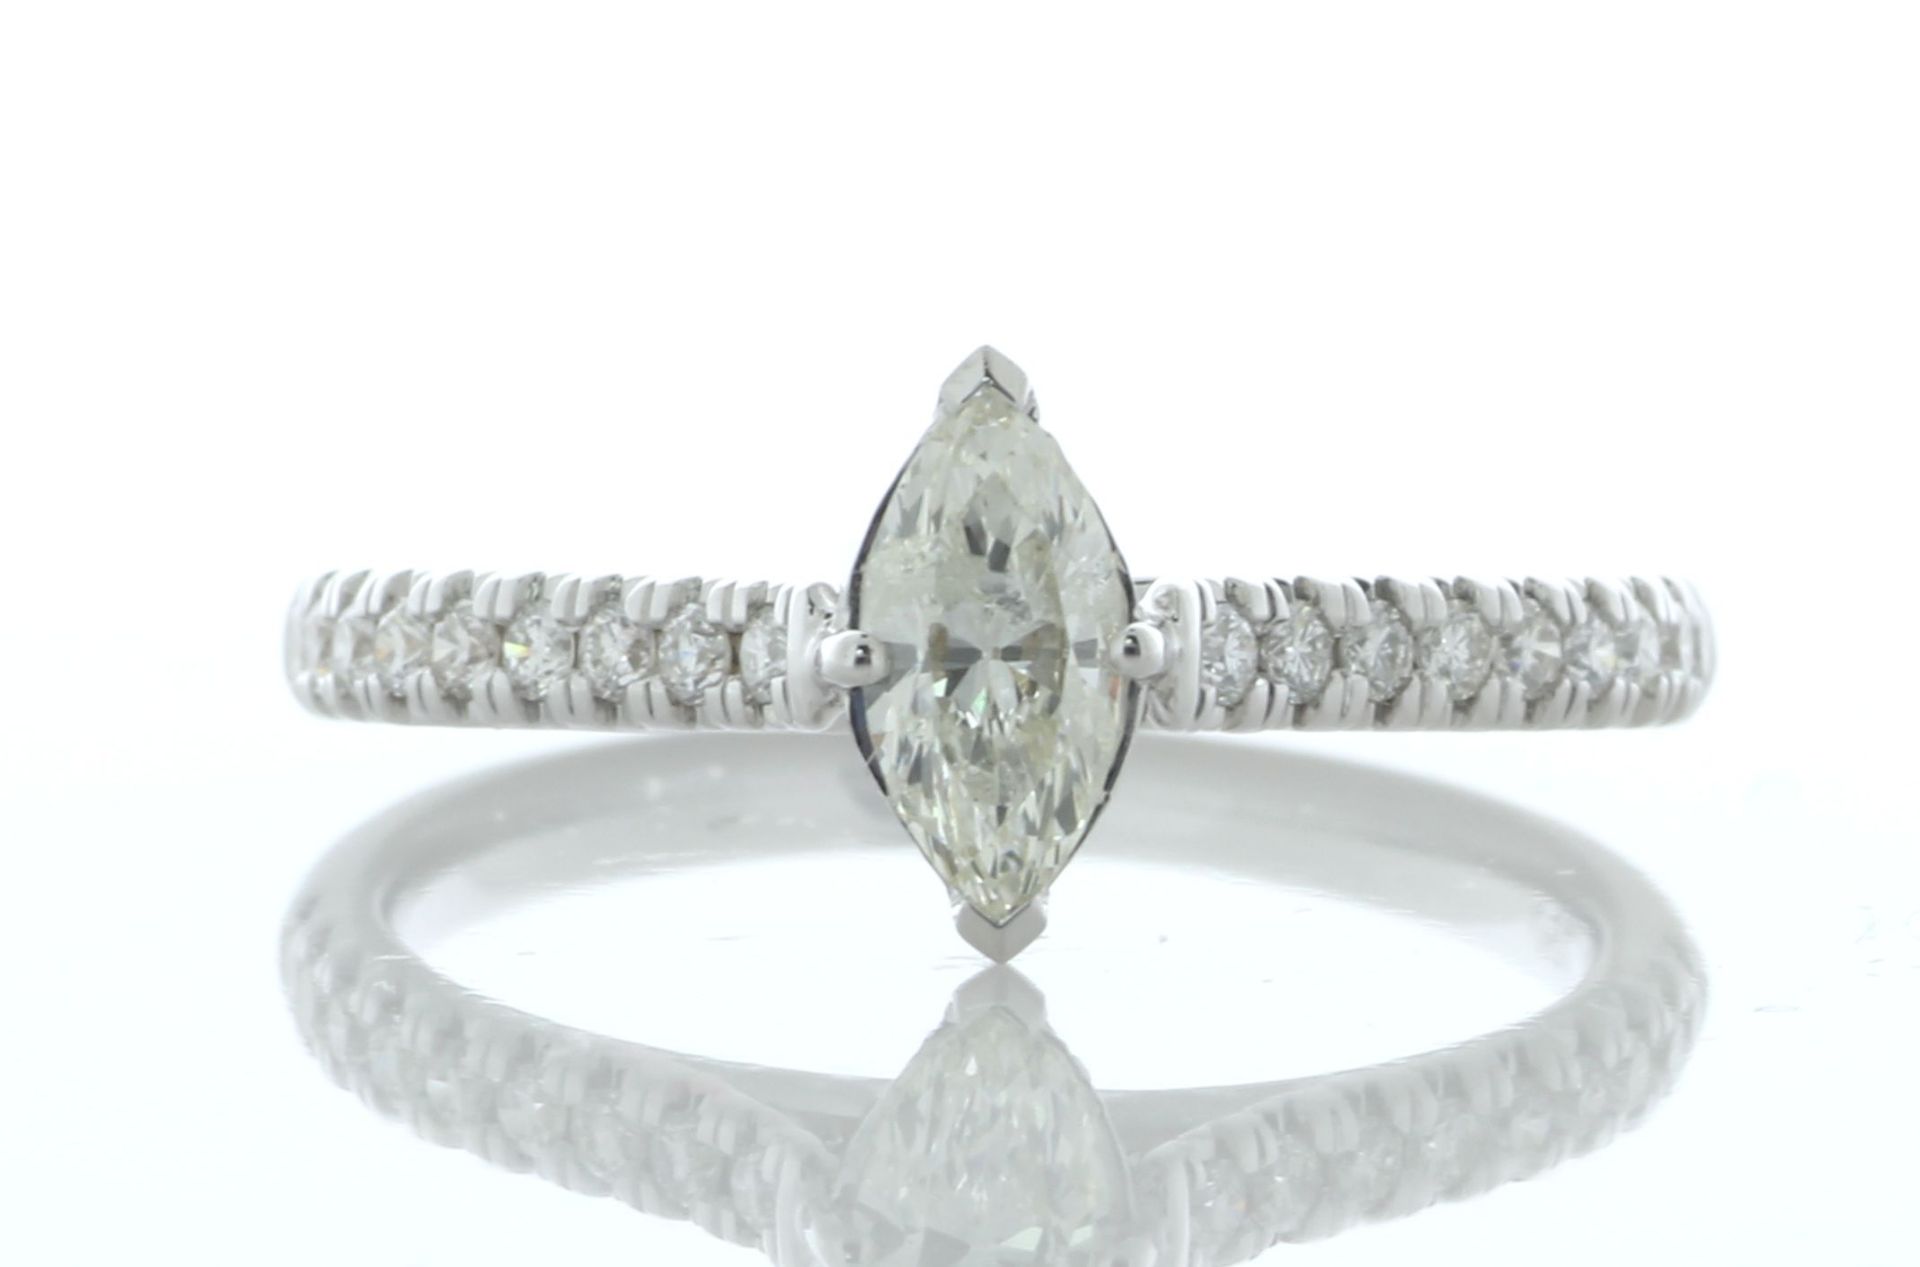 18ct White Gold Marquise Cut Diamond Ring (0.38) 0.62 Carats - Valued By IDI £6,265.00 - A